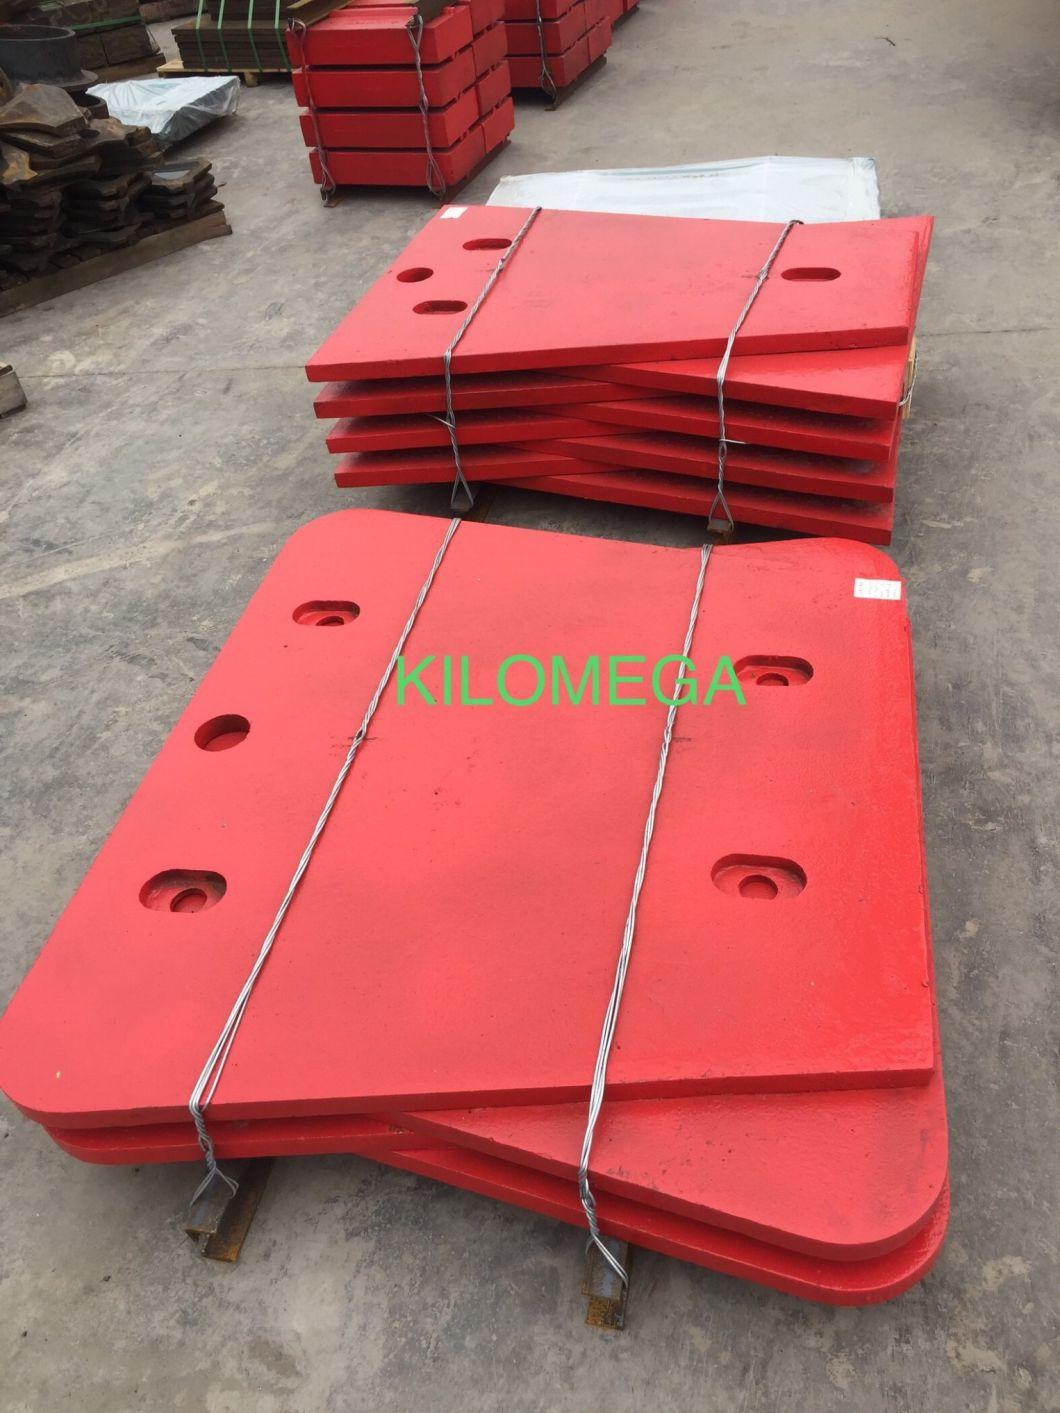 Cone Crusher Wear Parts Mantle with Good Quality